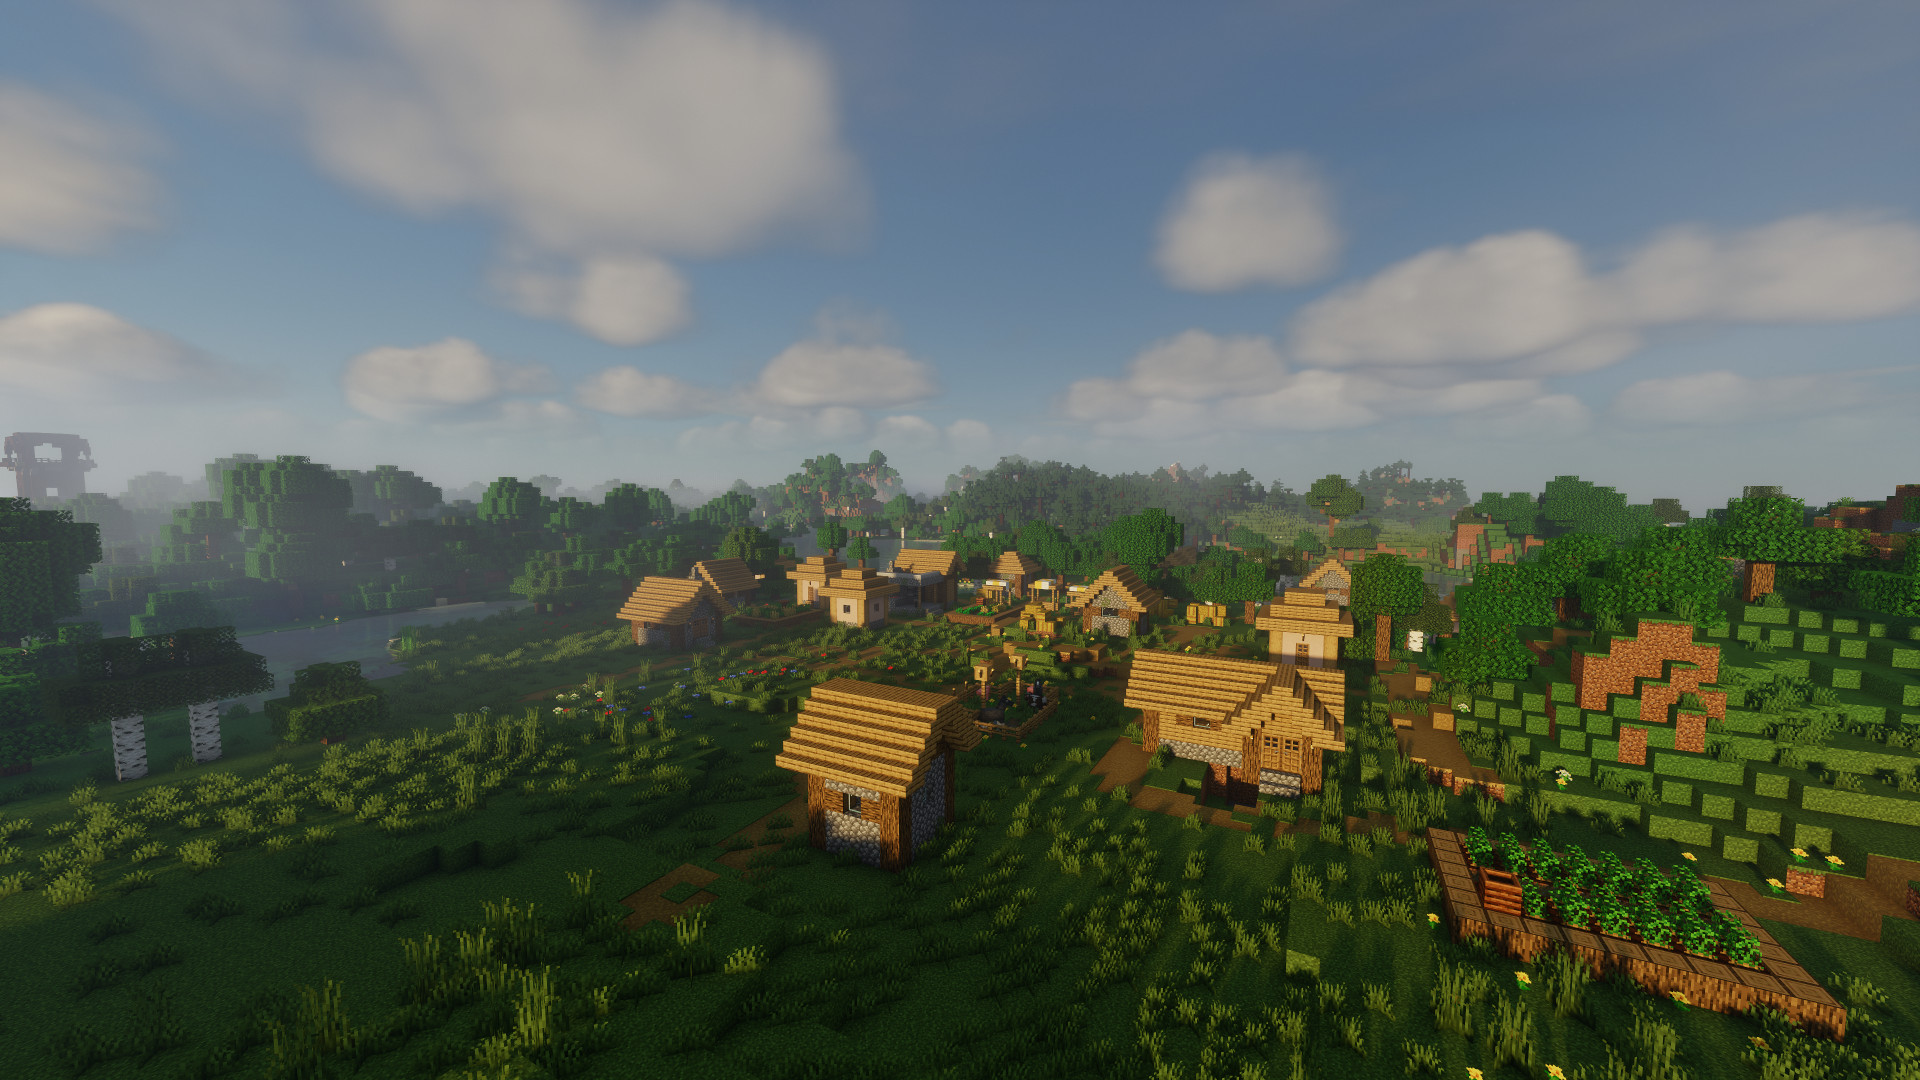 images/2406/14/Chocapic13_Shaders_3.jpg